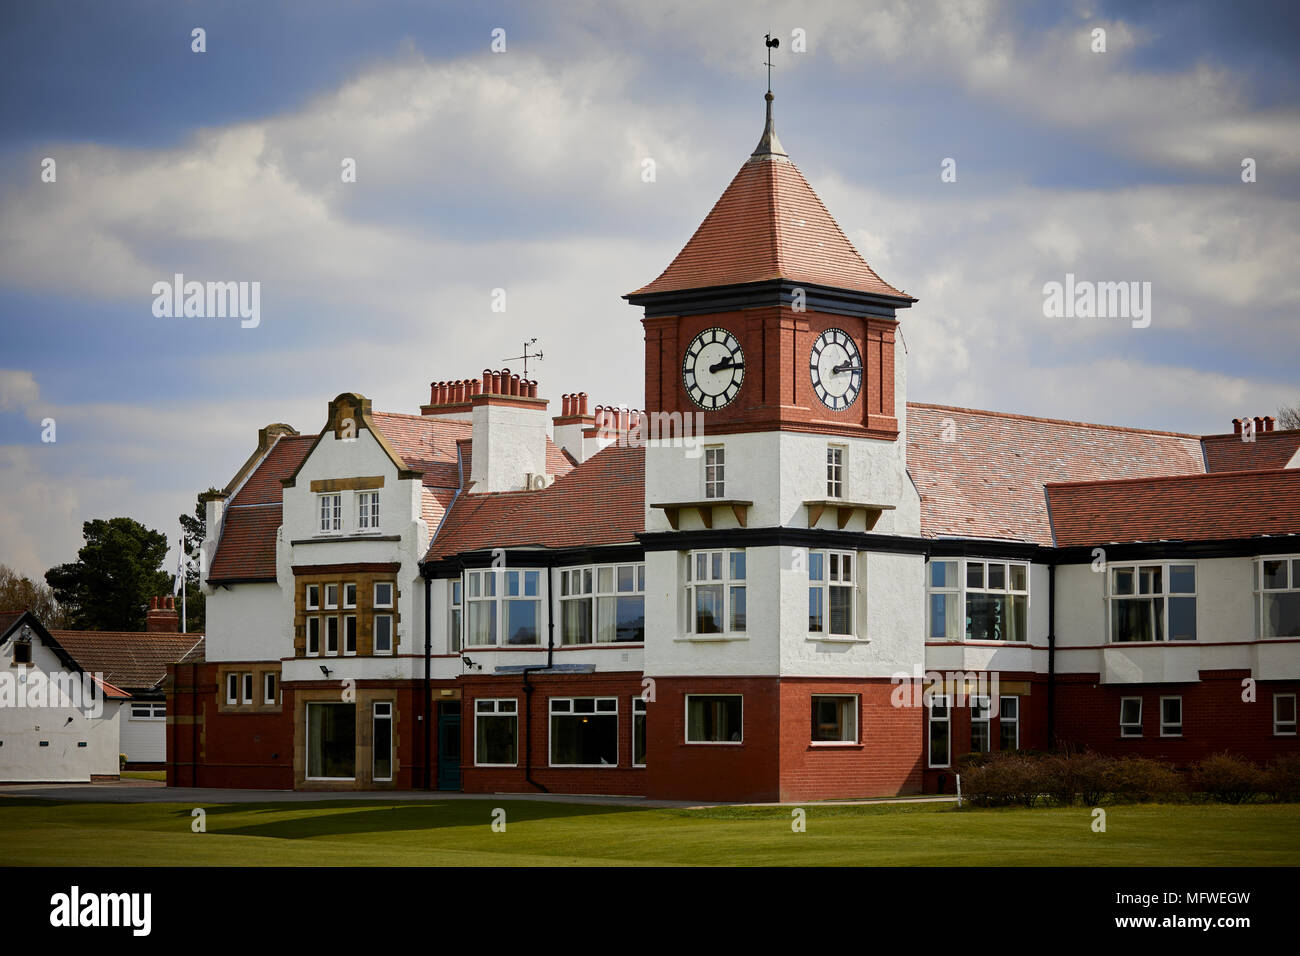 Formby, Arrondissement de Sefton, Merseyside, Angleterre. Formby Golf Club club house Banque D'Images